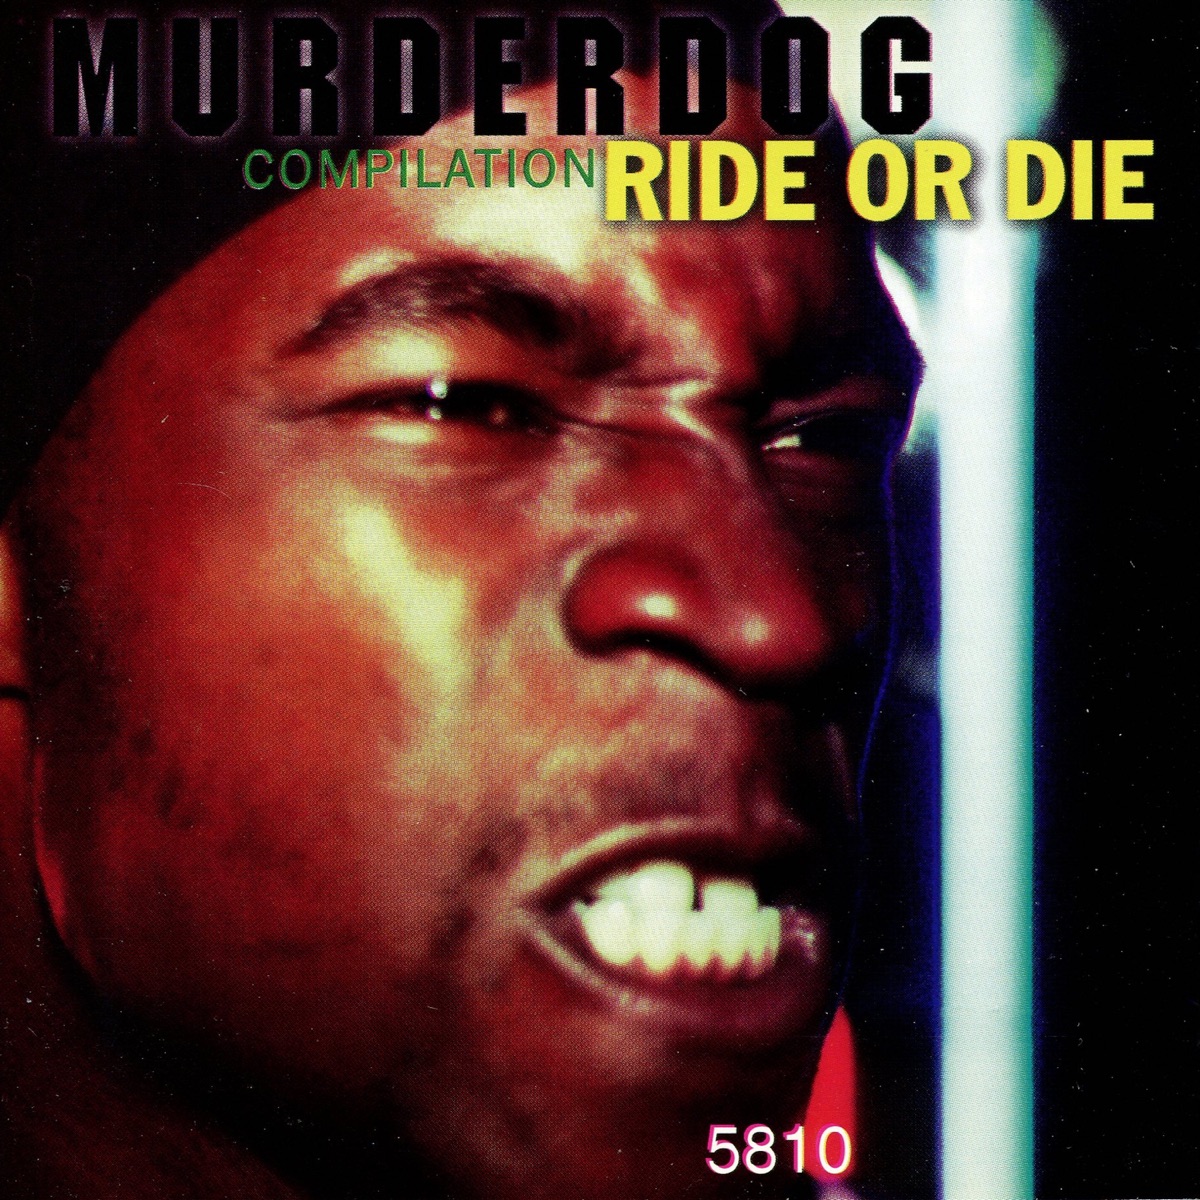 ‎Murder Dog Compilation - Ride Or Die - Album by Various Artists